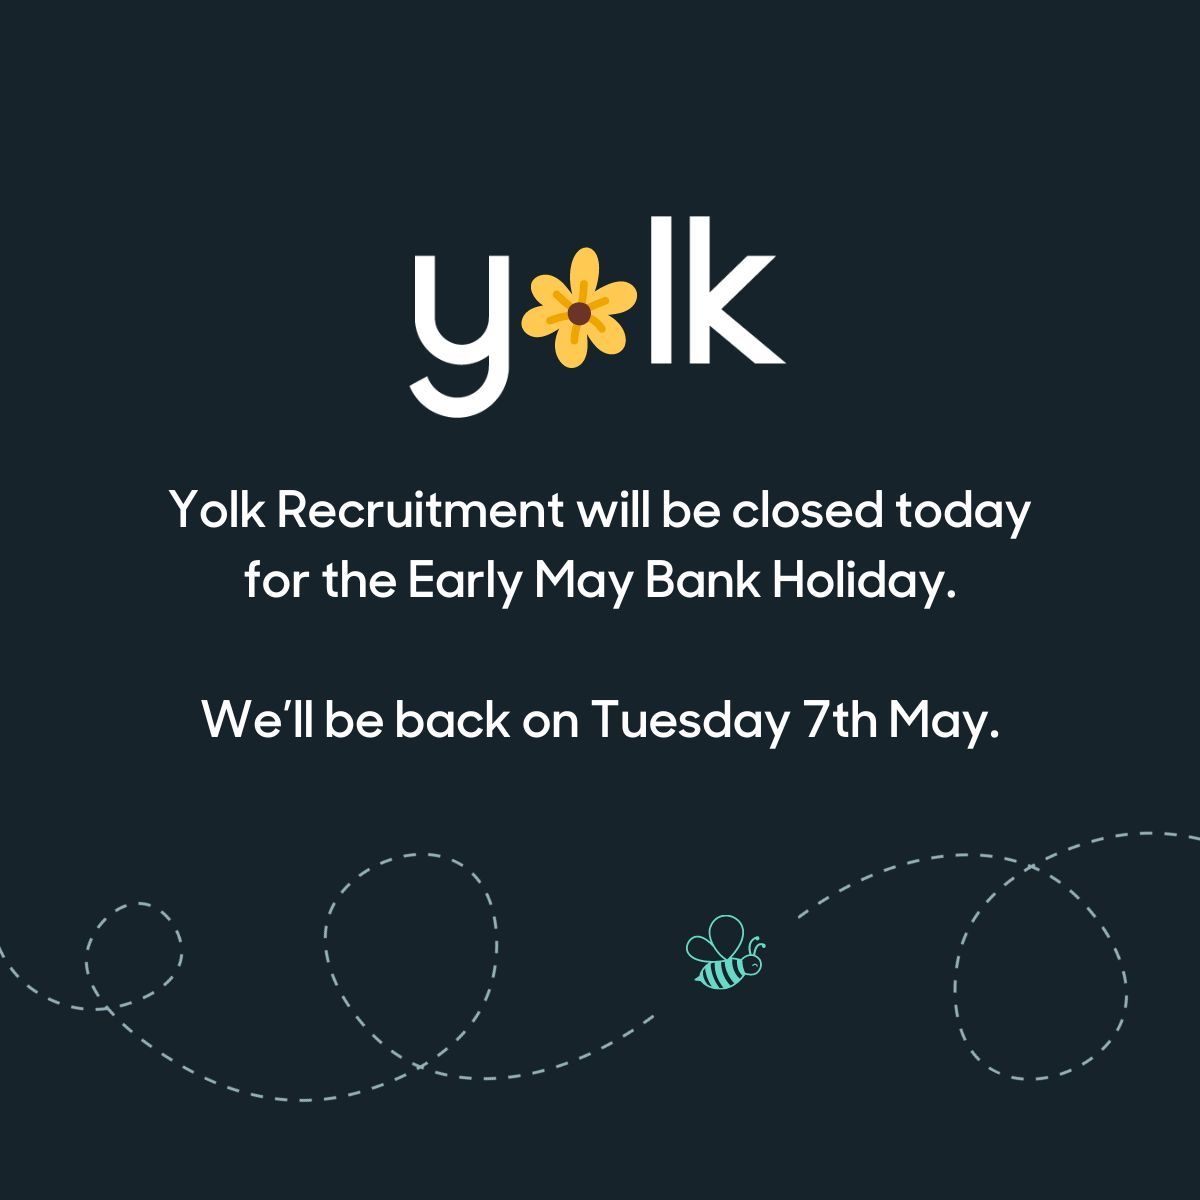 Early May bank holiday shutdown 🌻

A very happy long weekend from everyone at Yolk HQ!

Please note that our office will be closed today. We'll be back at our desks tomorrow, Tuesday 7th May. 

For urgent enquiries during this time, please email us:

📧 info@yolkrecruitment.com